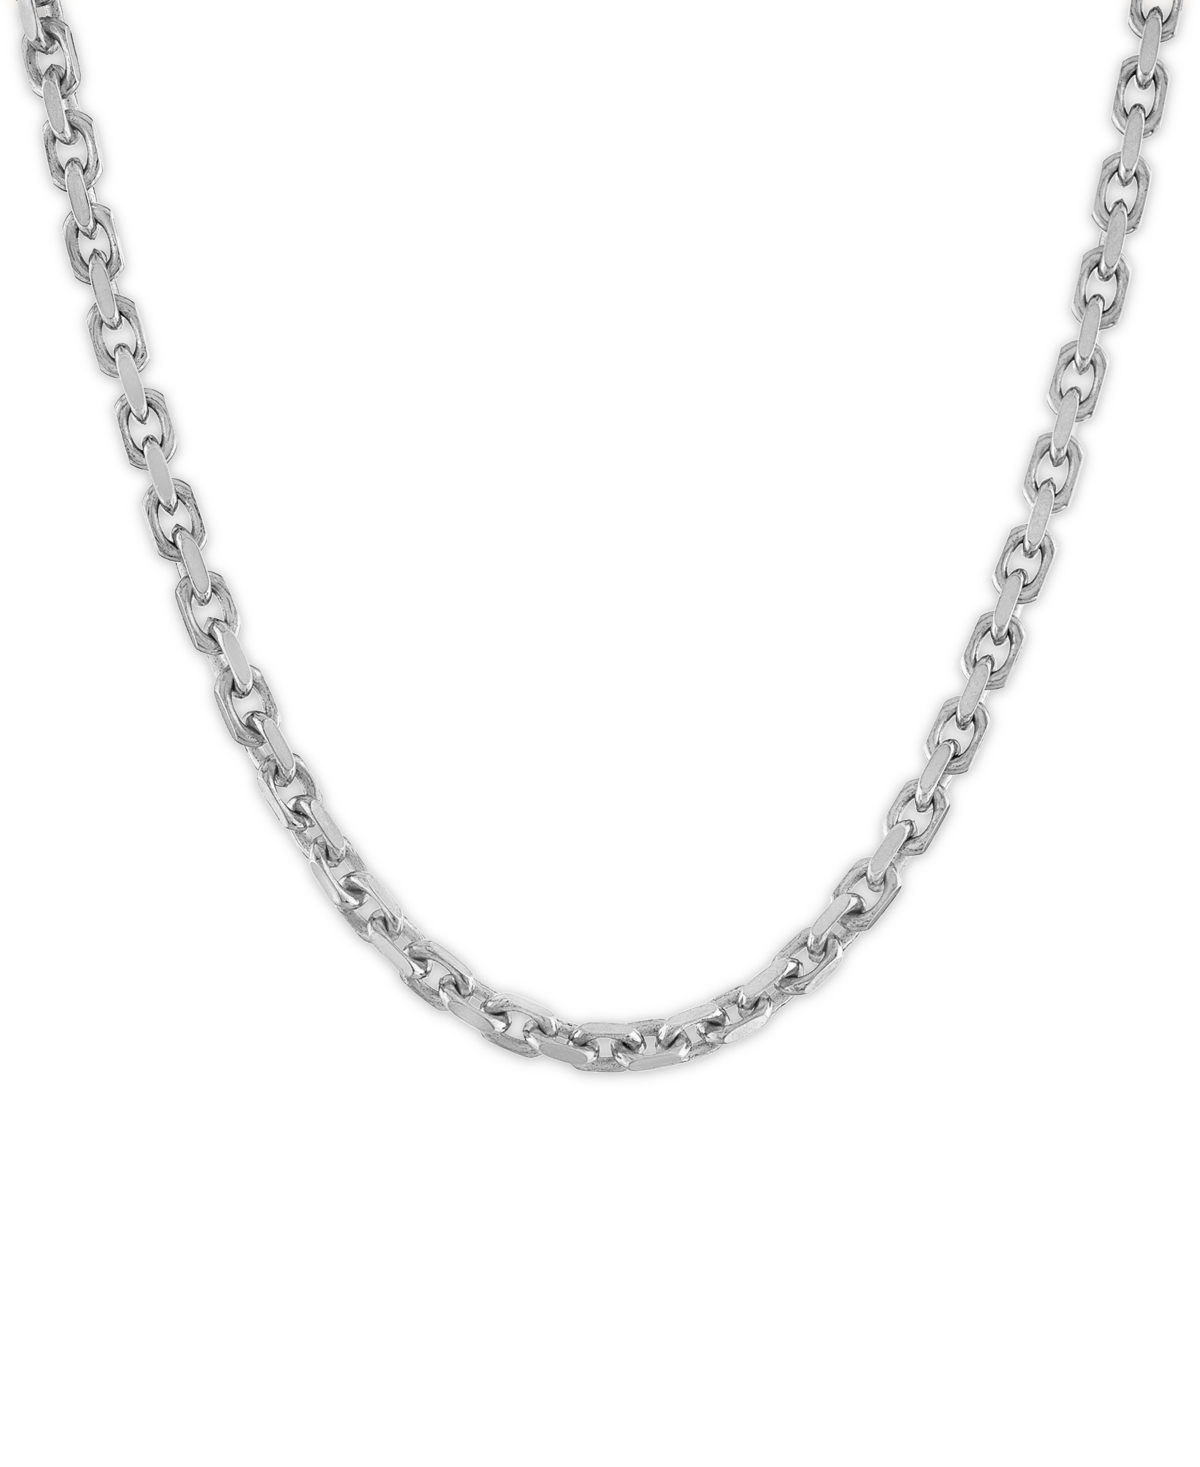 Cable Link 24" Chain Necklace, Created for Macy's - Silver